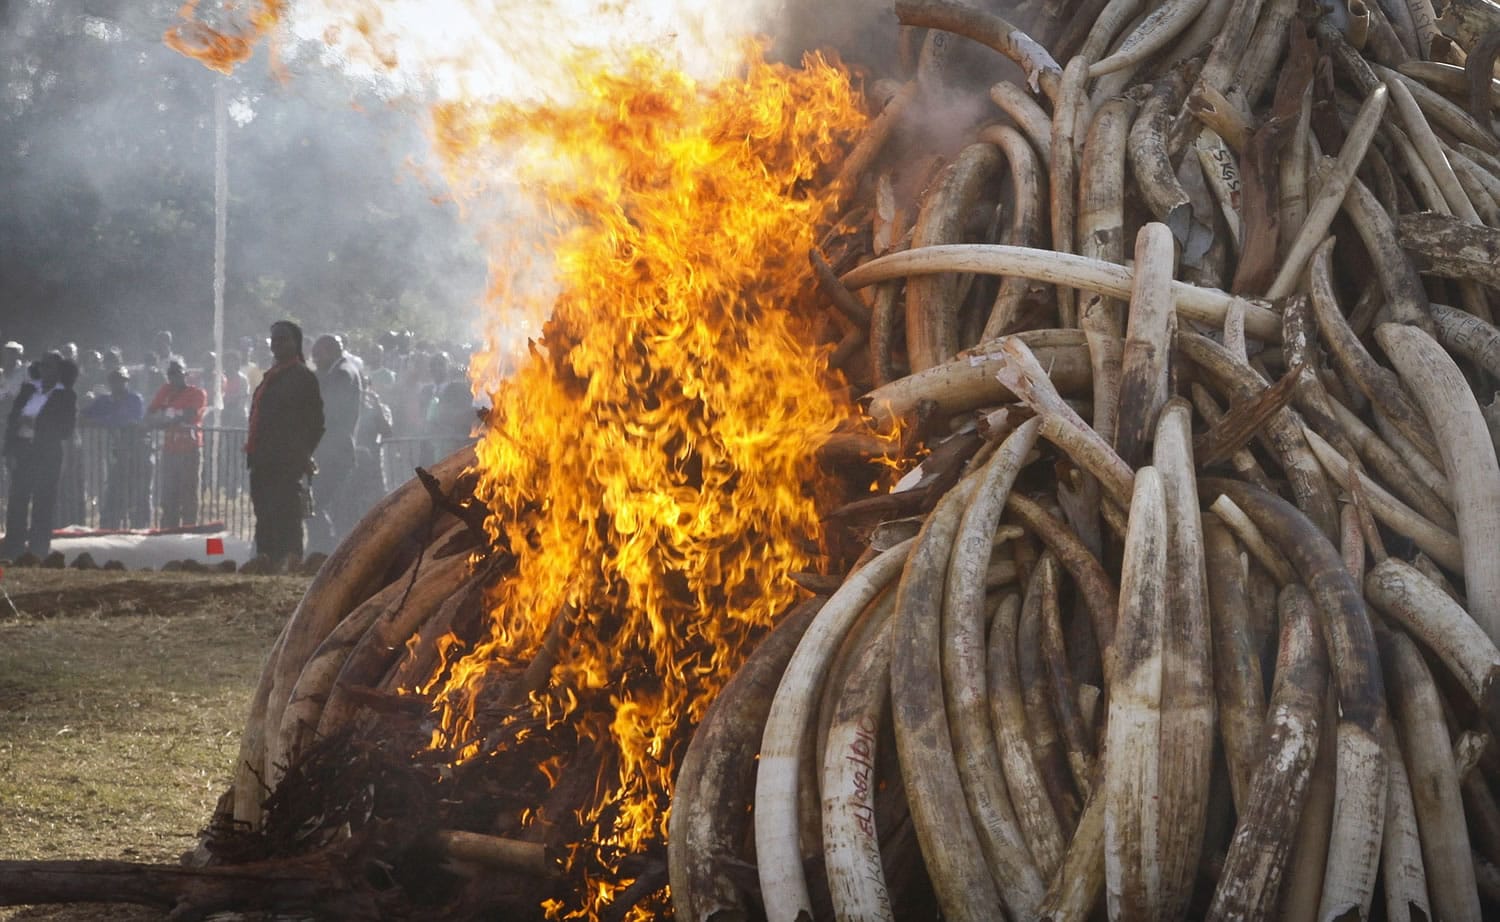 Associated Press files
Fifteen tons of elephant tusks are set on fire during an anti-poaching ceremony in March at Nairobi National Park in Nairobi, Kenya. Conservationists are applauding a pledge by a Chinese official to stop the ivory trade there.